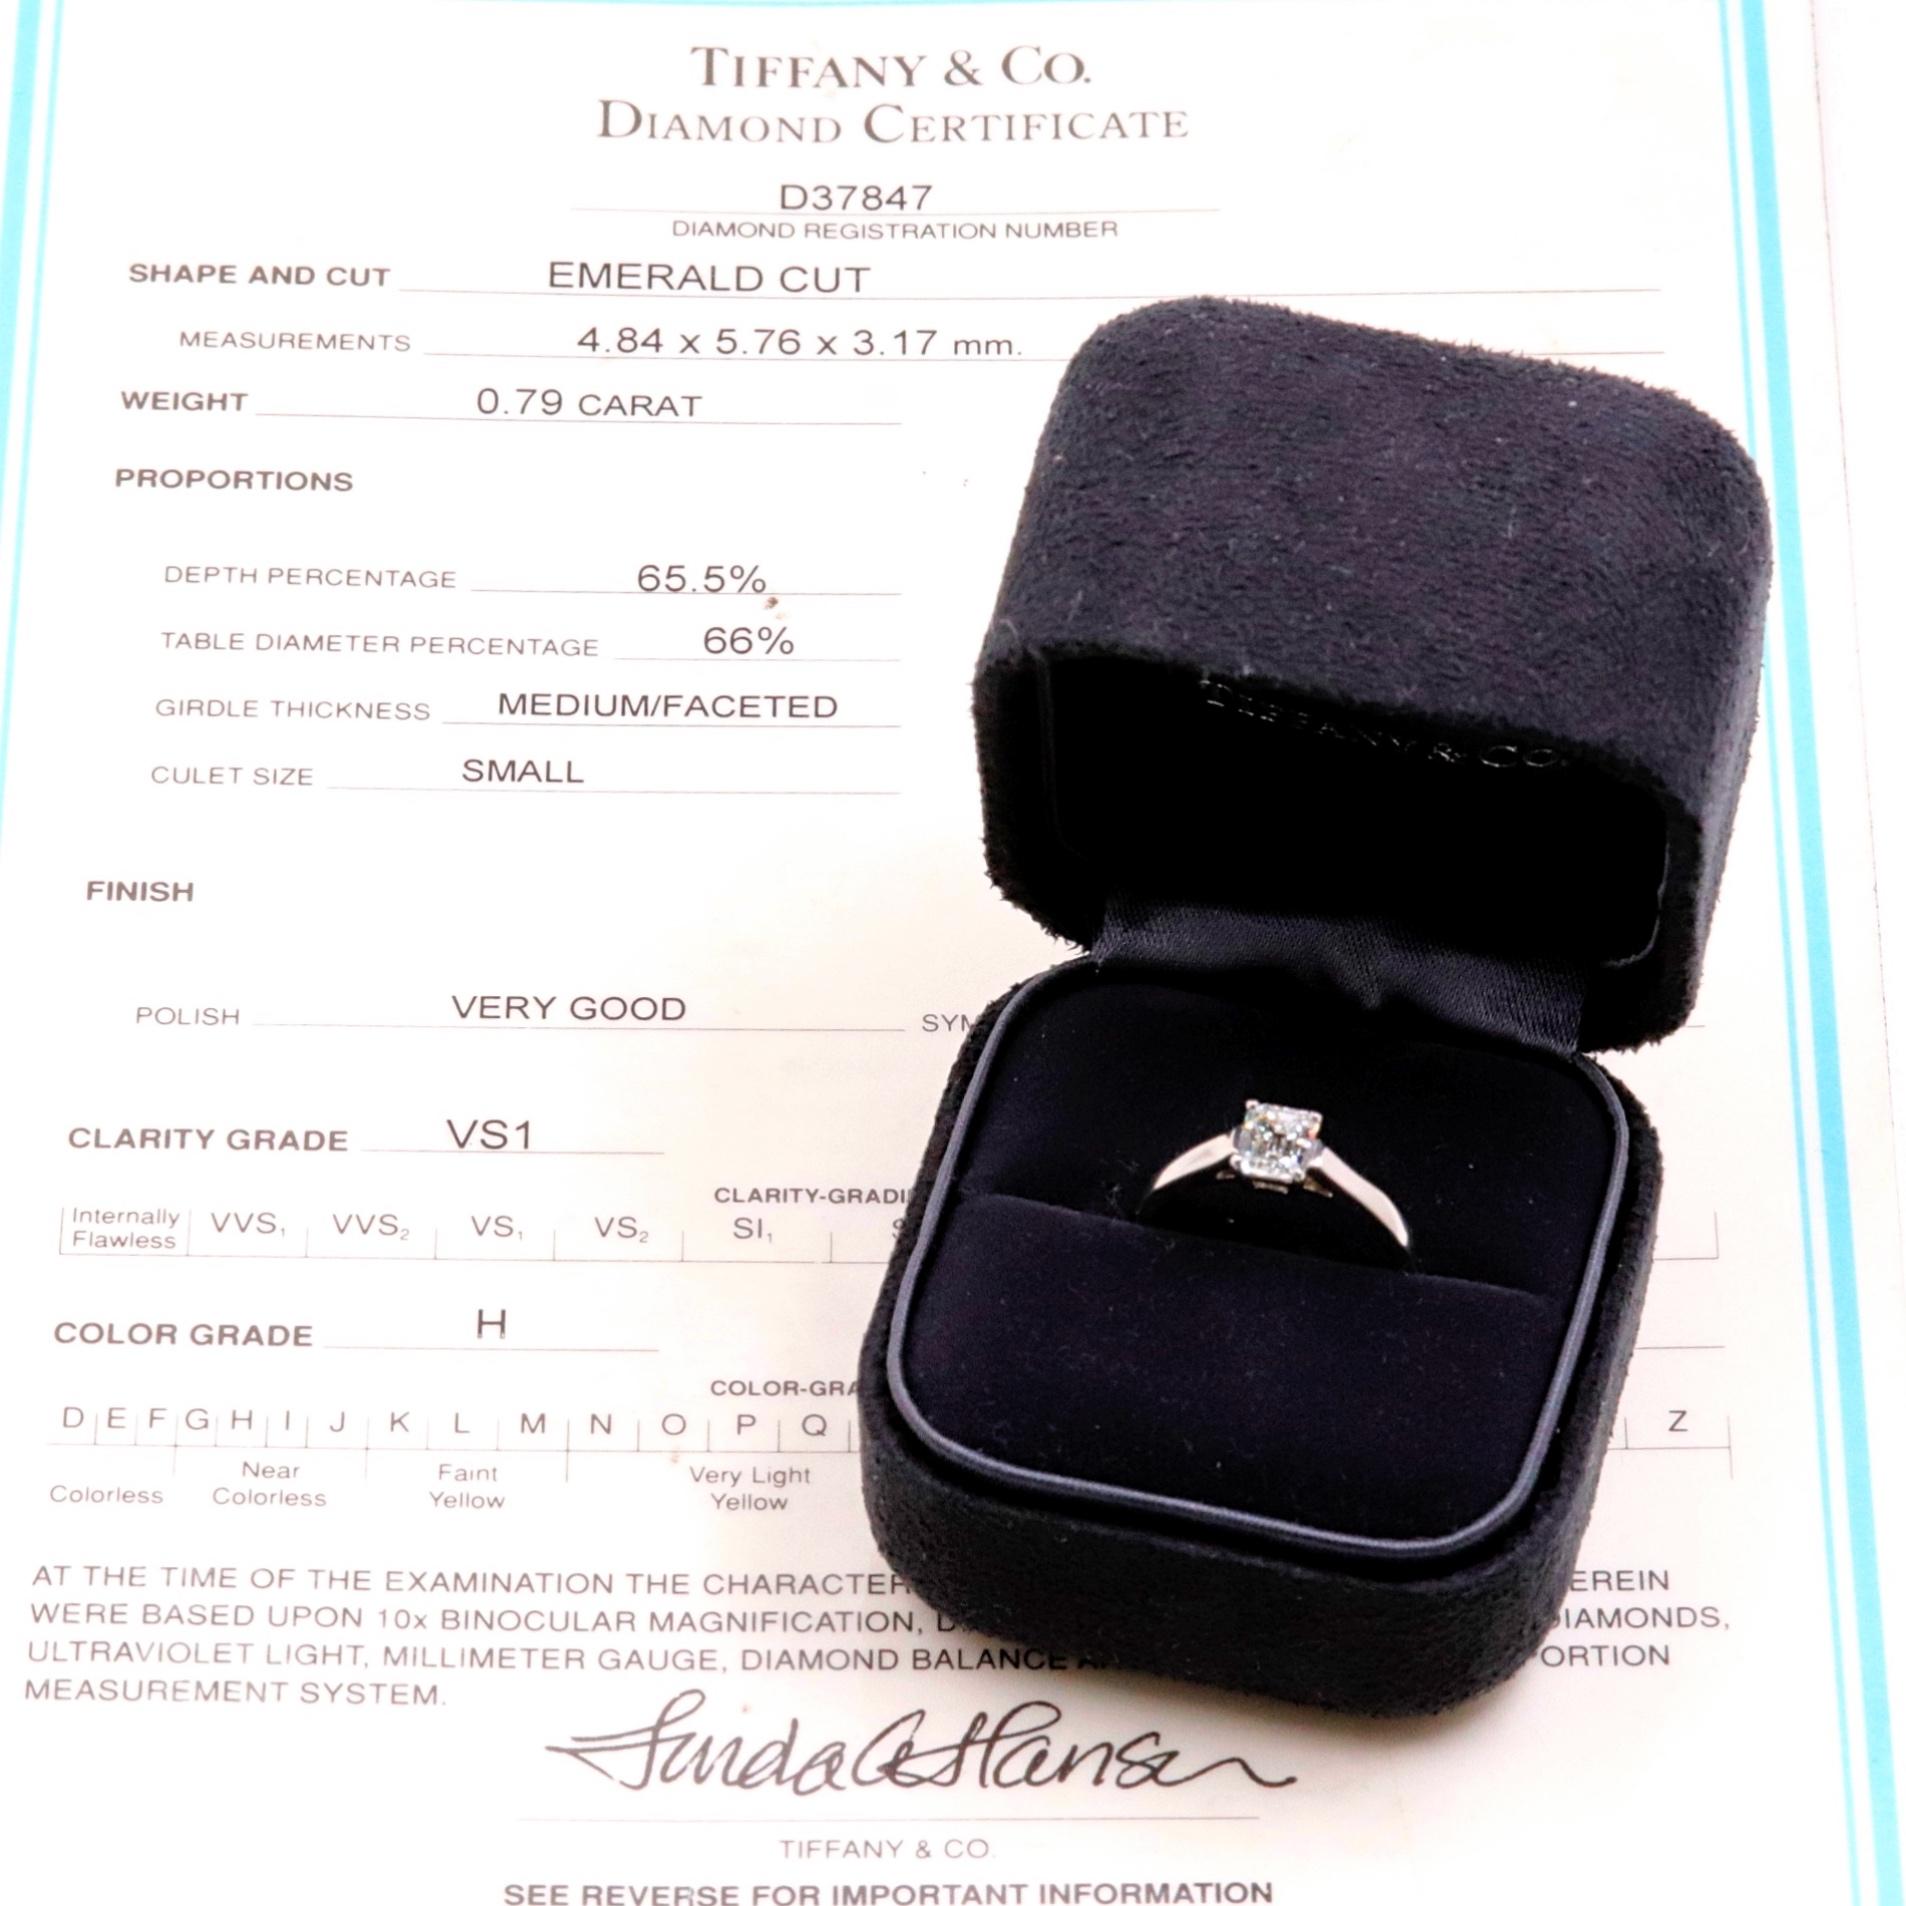 Tiffany & Co.

Style:  Emerald Diamond Solitaire Engagement Ring
Serial Number:  D37847
Metal:  Platinum PT950
Size:  6 - sizable
Total Carat Weight:  0.79 CTS
Diamond Shape:  Emerald Cut
Diamond Color & Clarity:   H - VS1
Hallmark:  TIFFANY&CO.